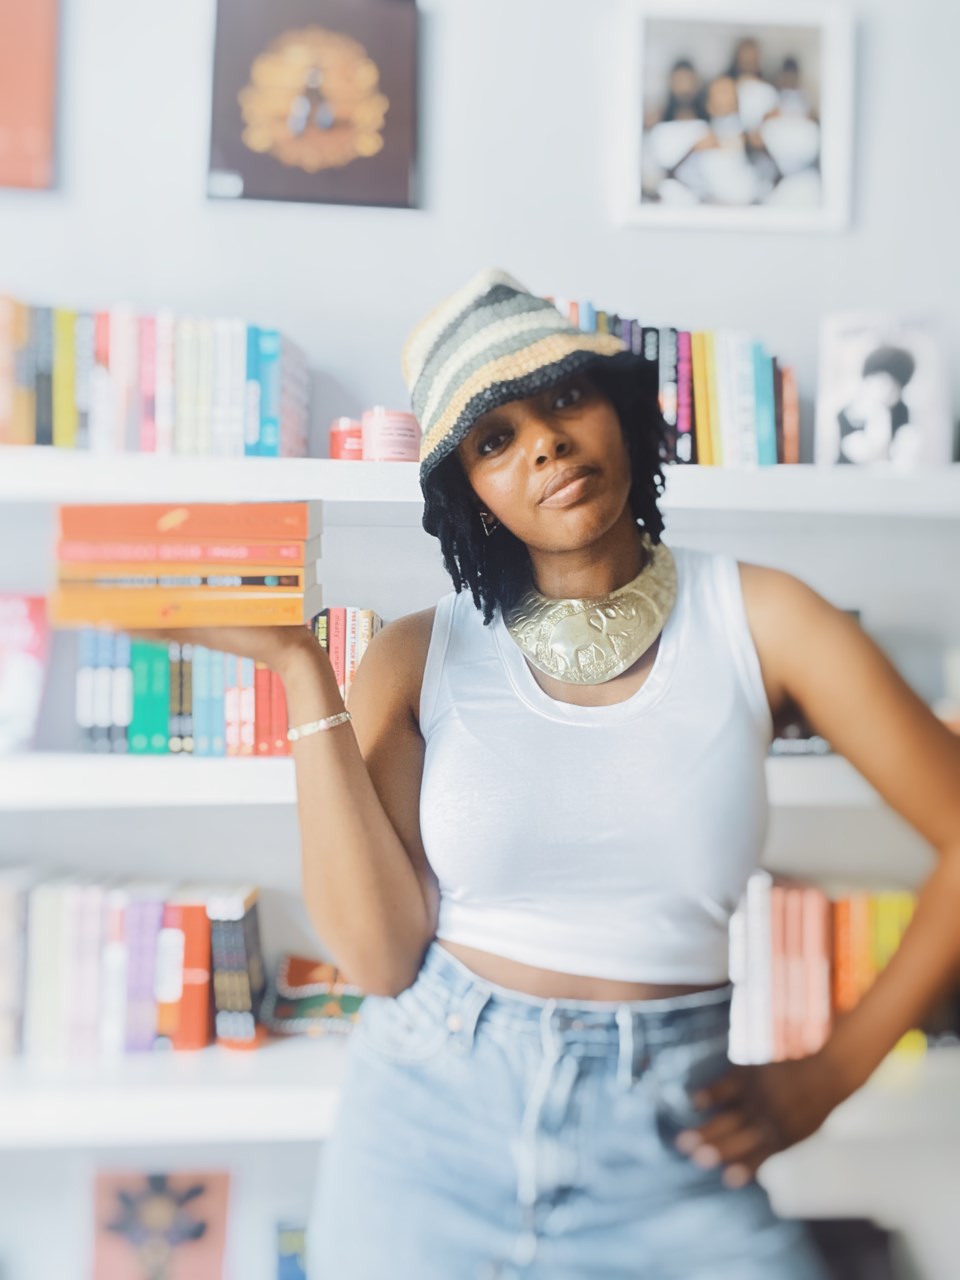 the-owner-of-adanne-bookstore-is-seeking-help-from-her-community-to-transition-into-the-bed-stuy-neighborhood